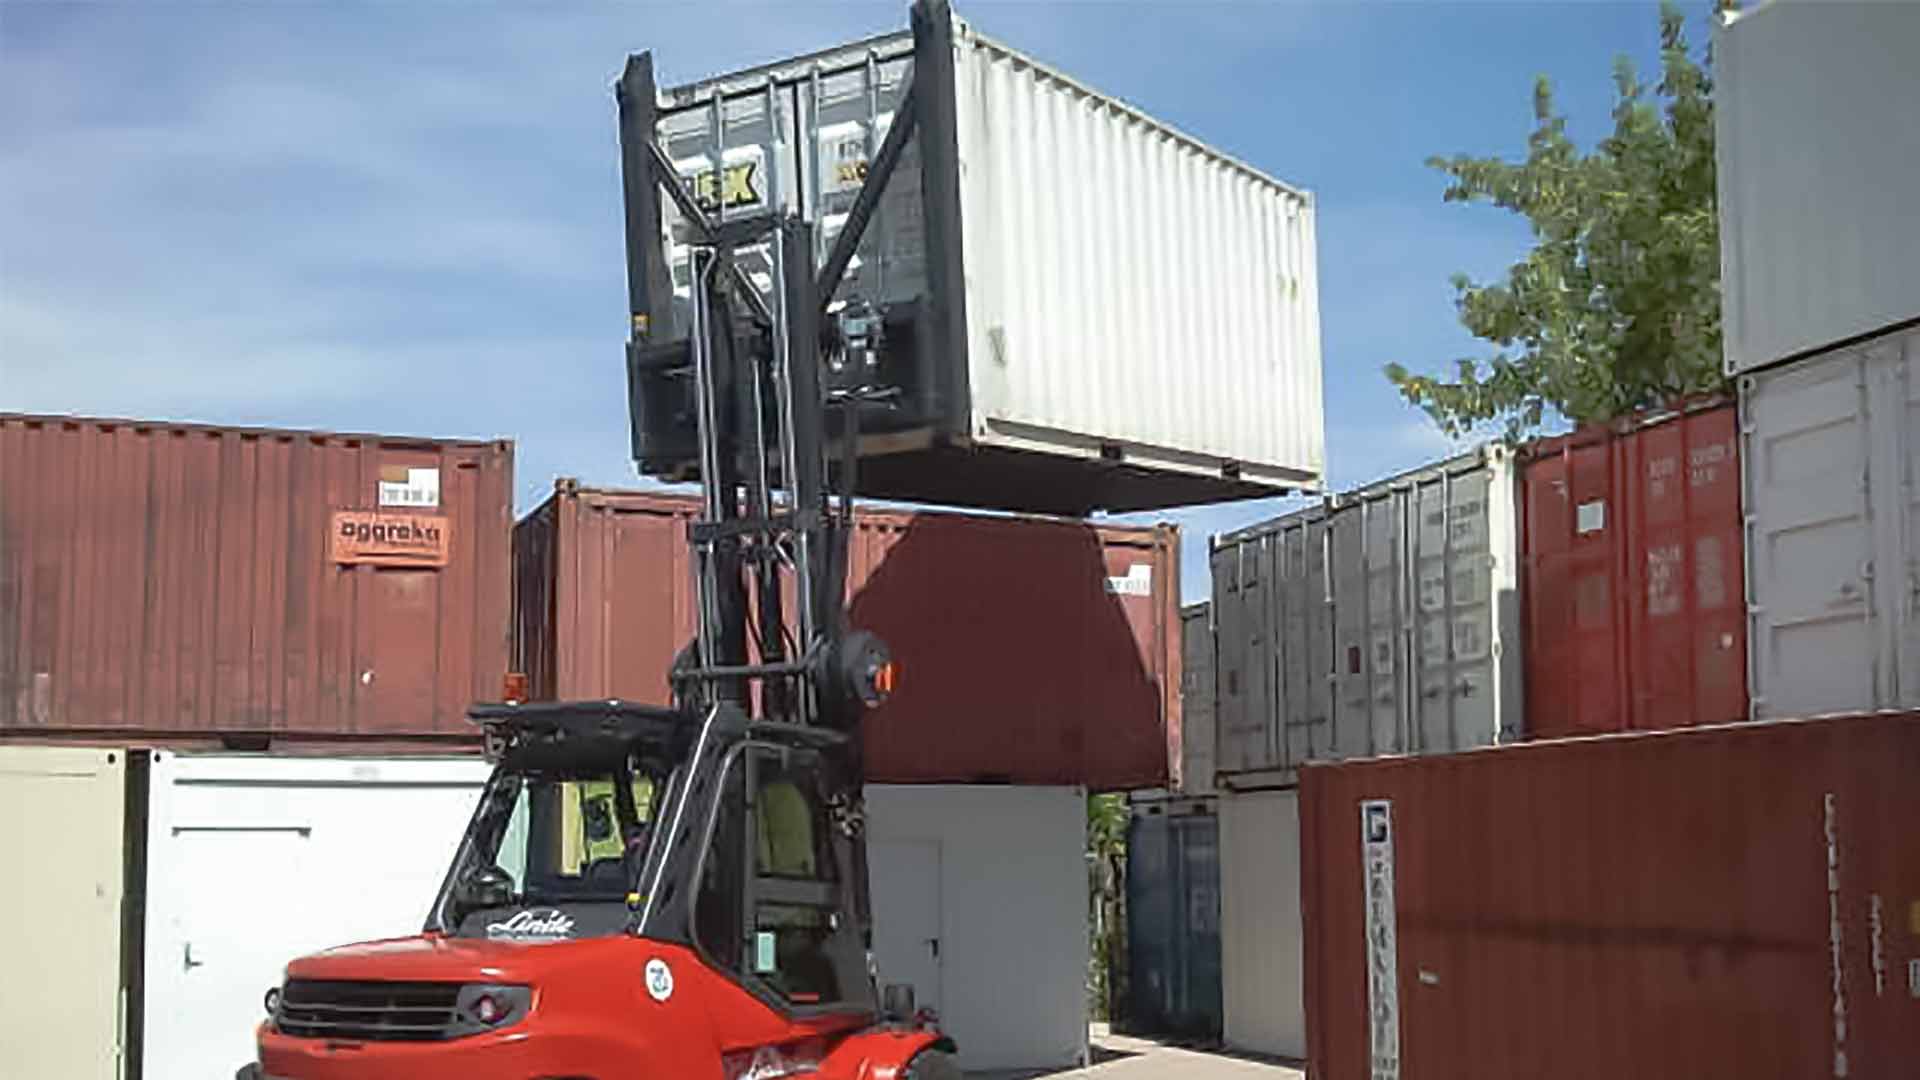 A red forklift lifts a container to place it on a stack of other containers